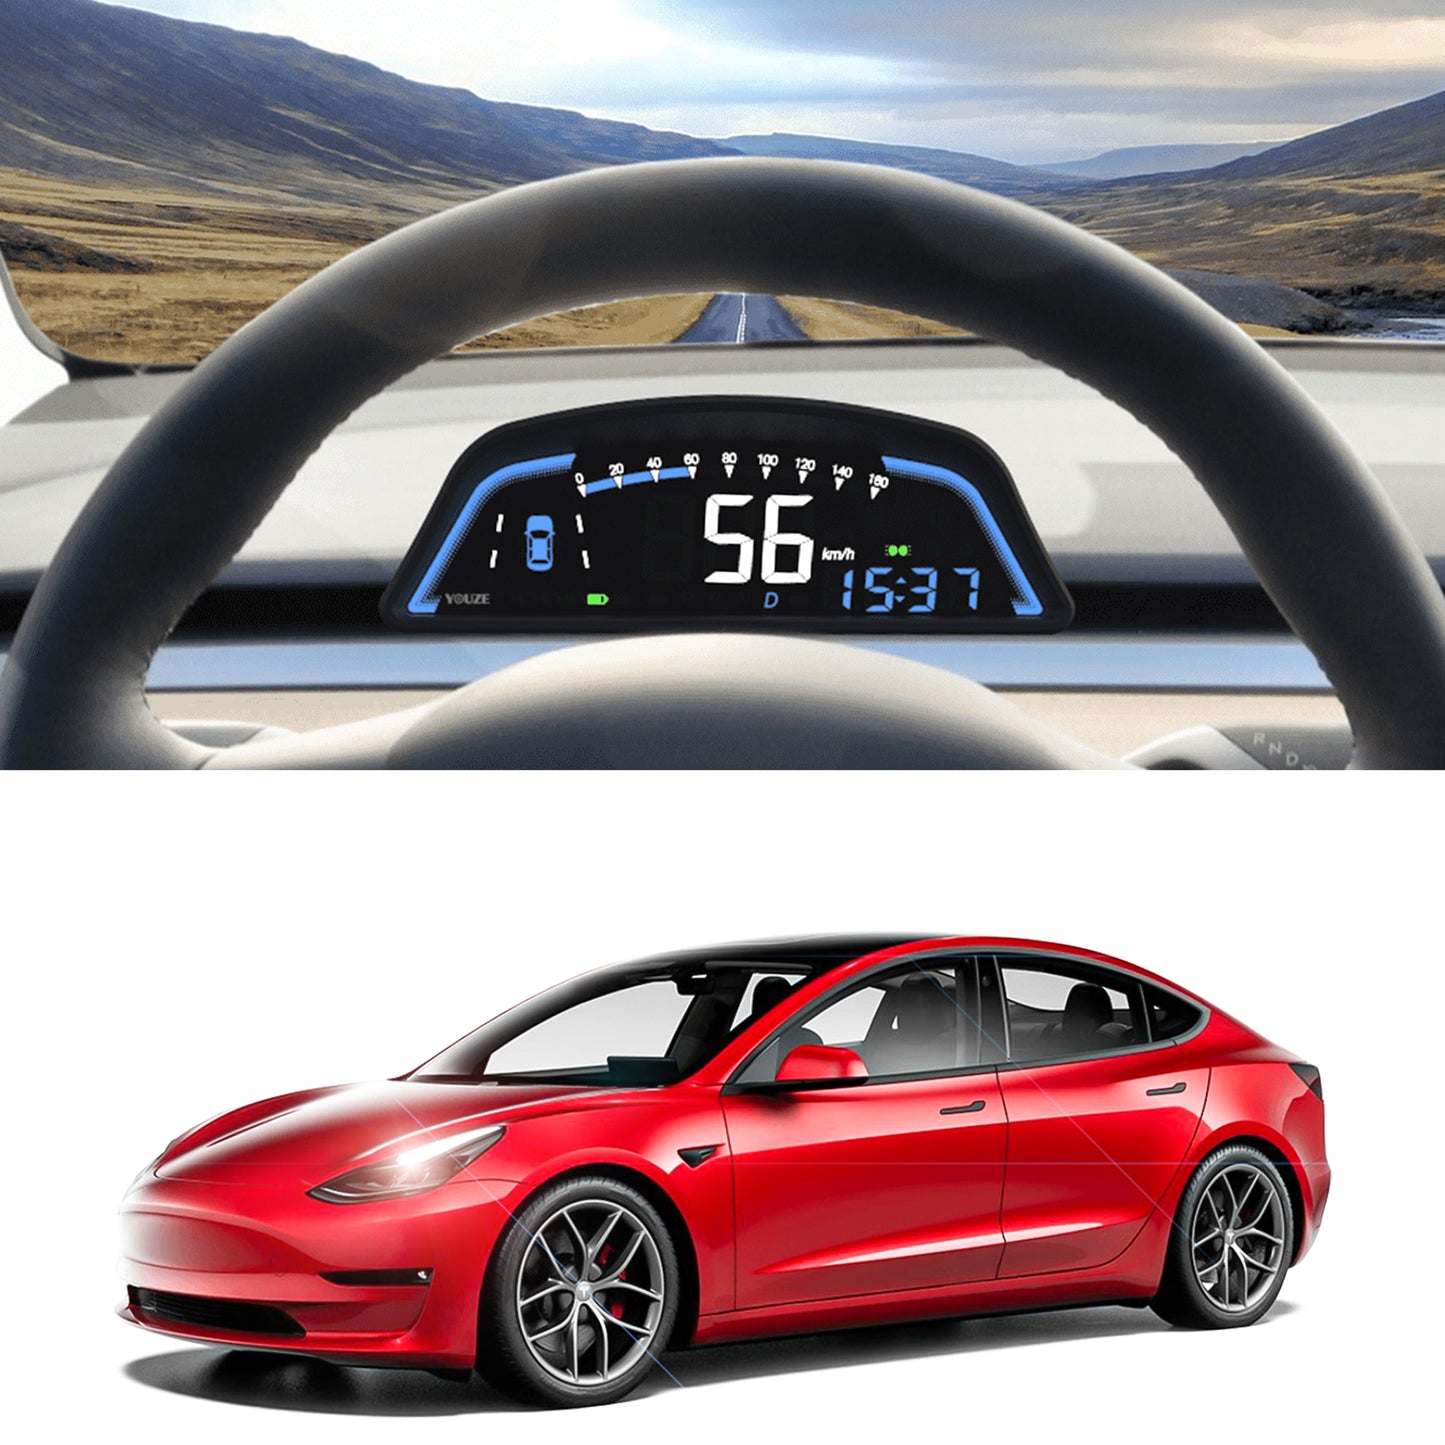 tesla model 3 Y 2022 2023 2021 s3xy all air stopwatch multi function speed lights turn signal grear speedometer hud real time driving data must have accessories accessory aftermarket price standard long range performance sr+ electric car rwd ev interior exterior diy decoration price elon musk black white red blue